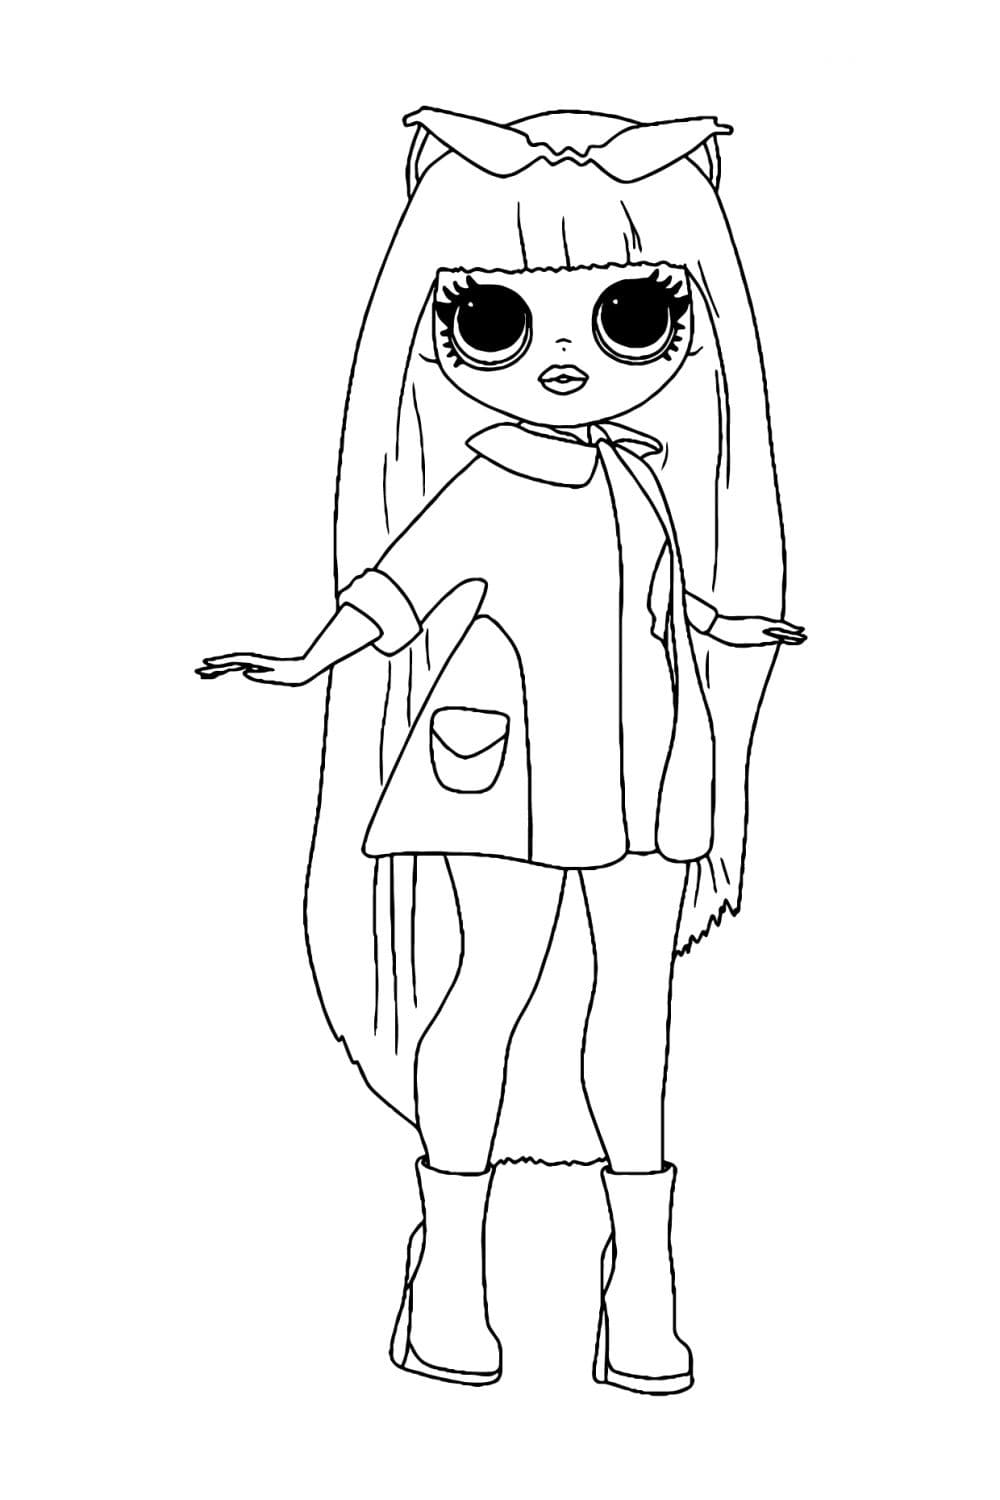 Coloriage lol omg groovy baby girl à imprimer